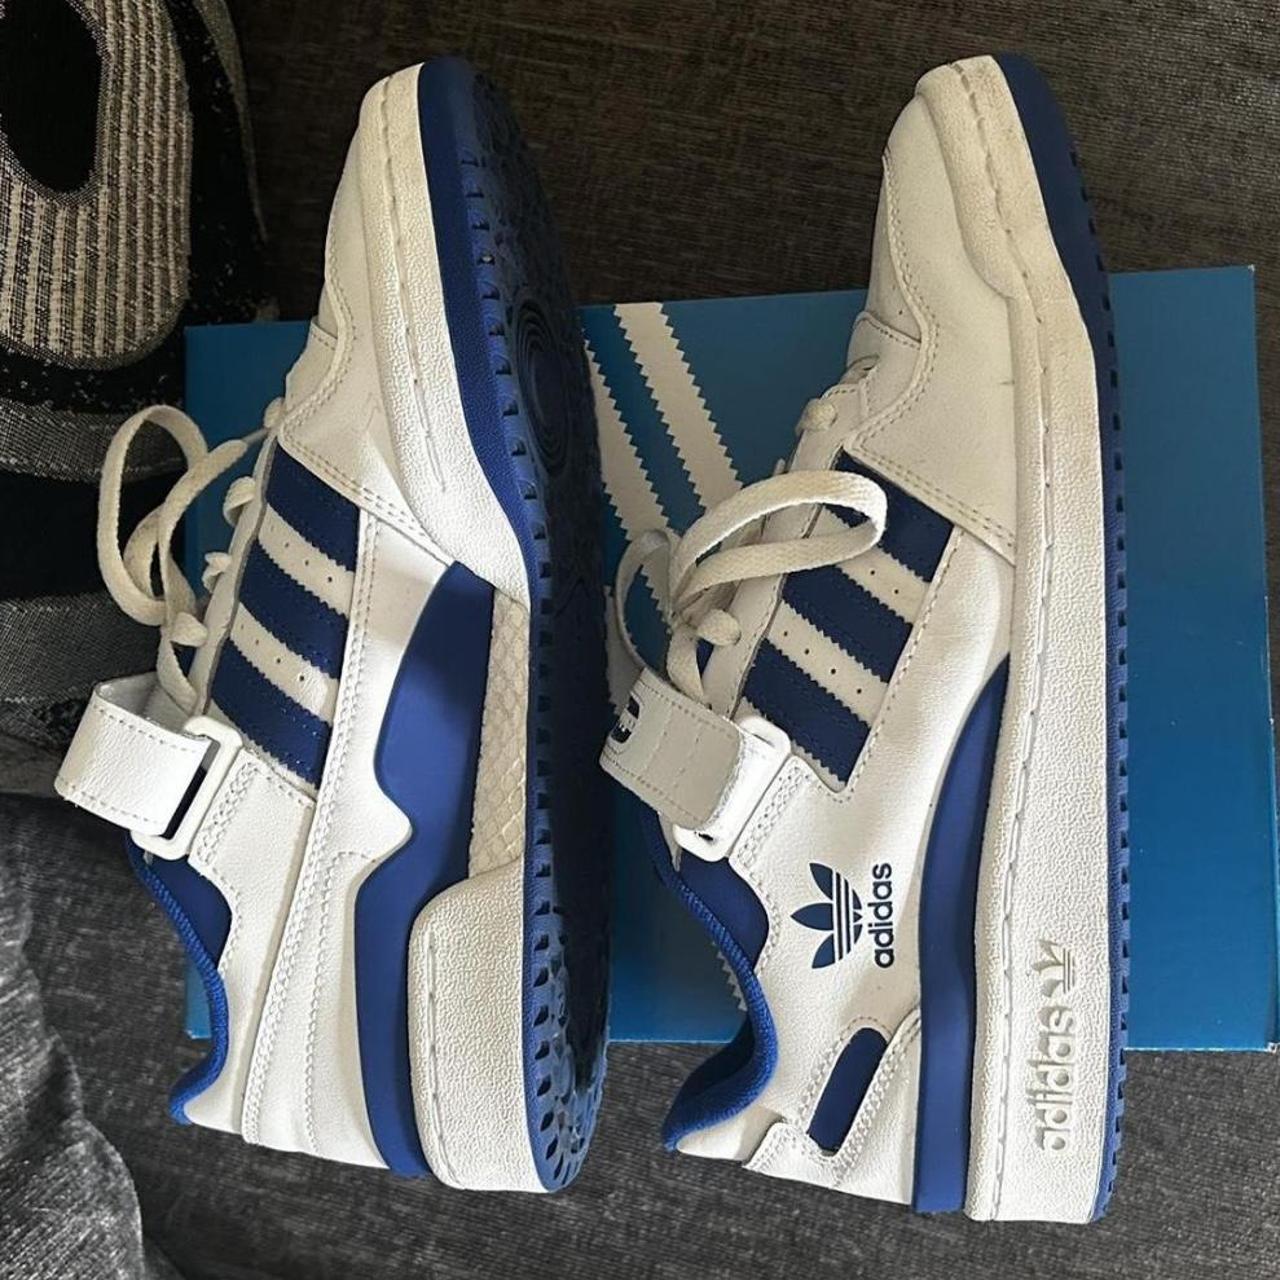 Adidas forum low shoes. Good as new, just don’t fit... - Depop